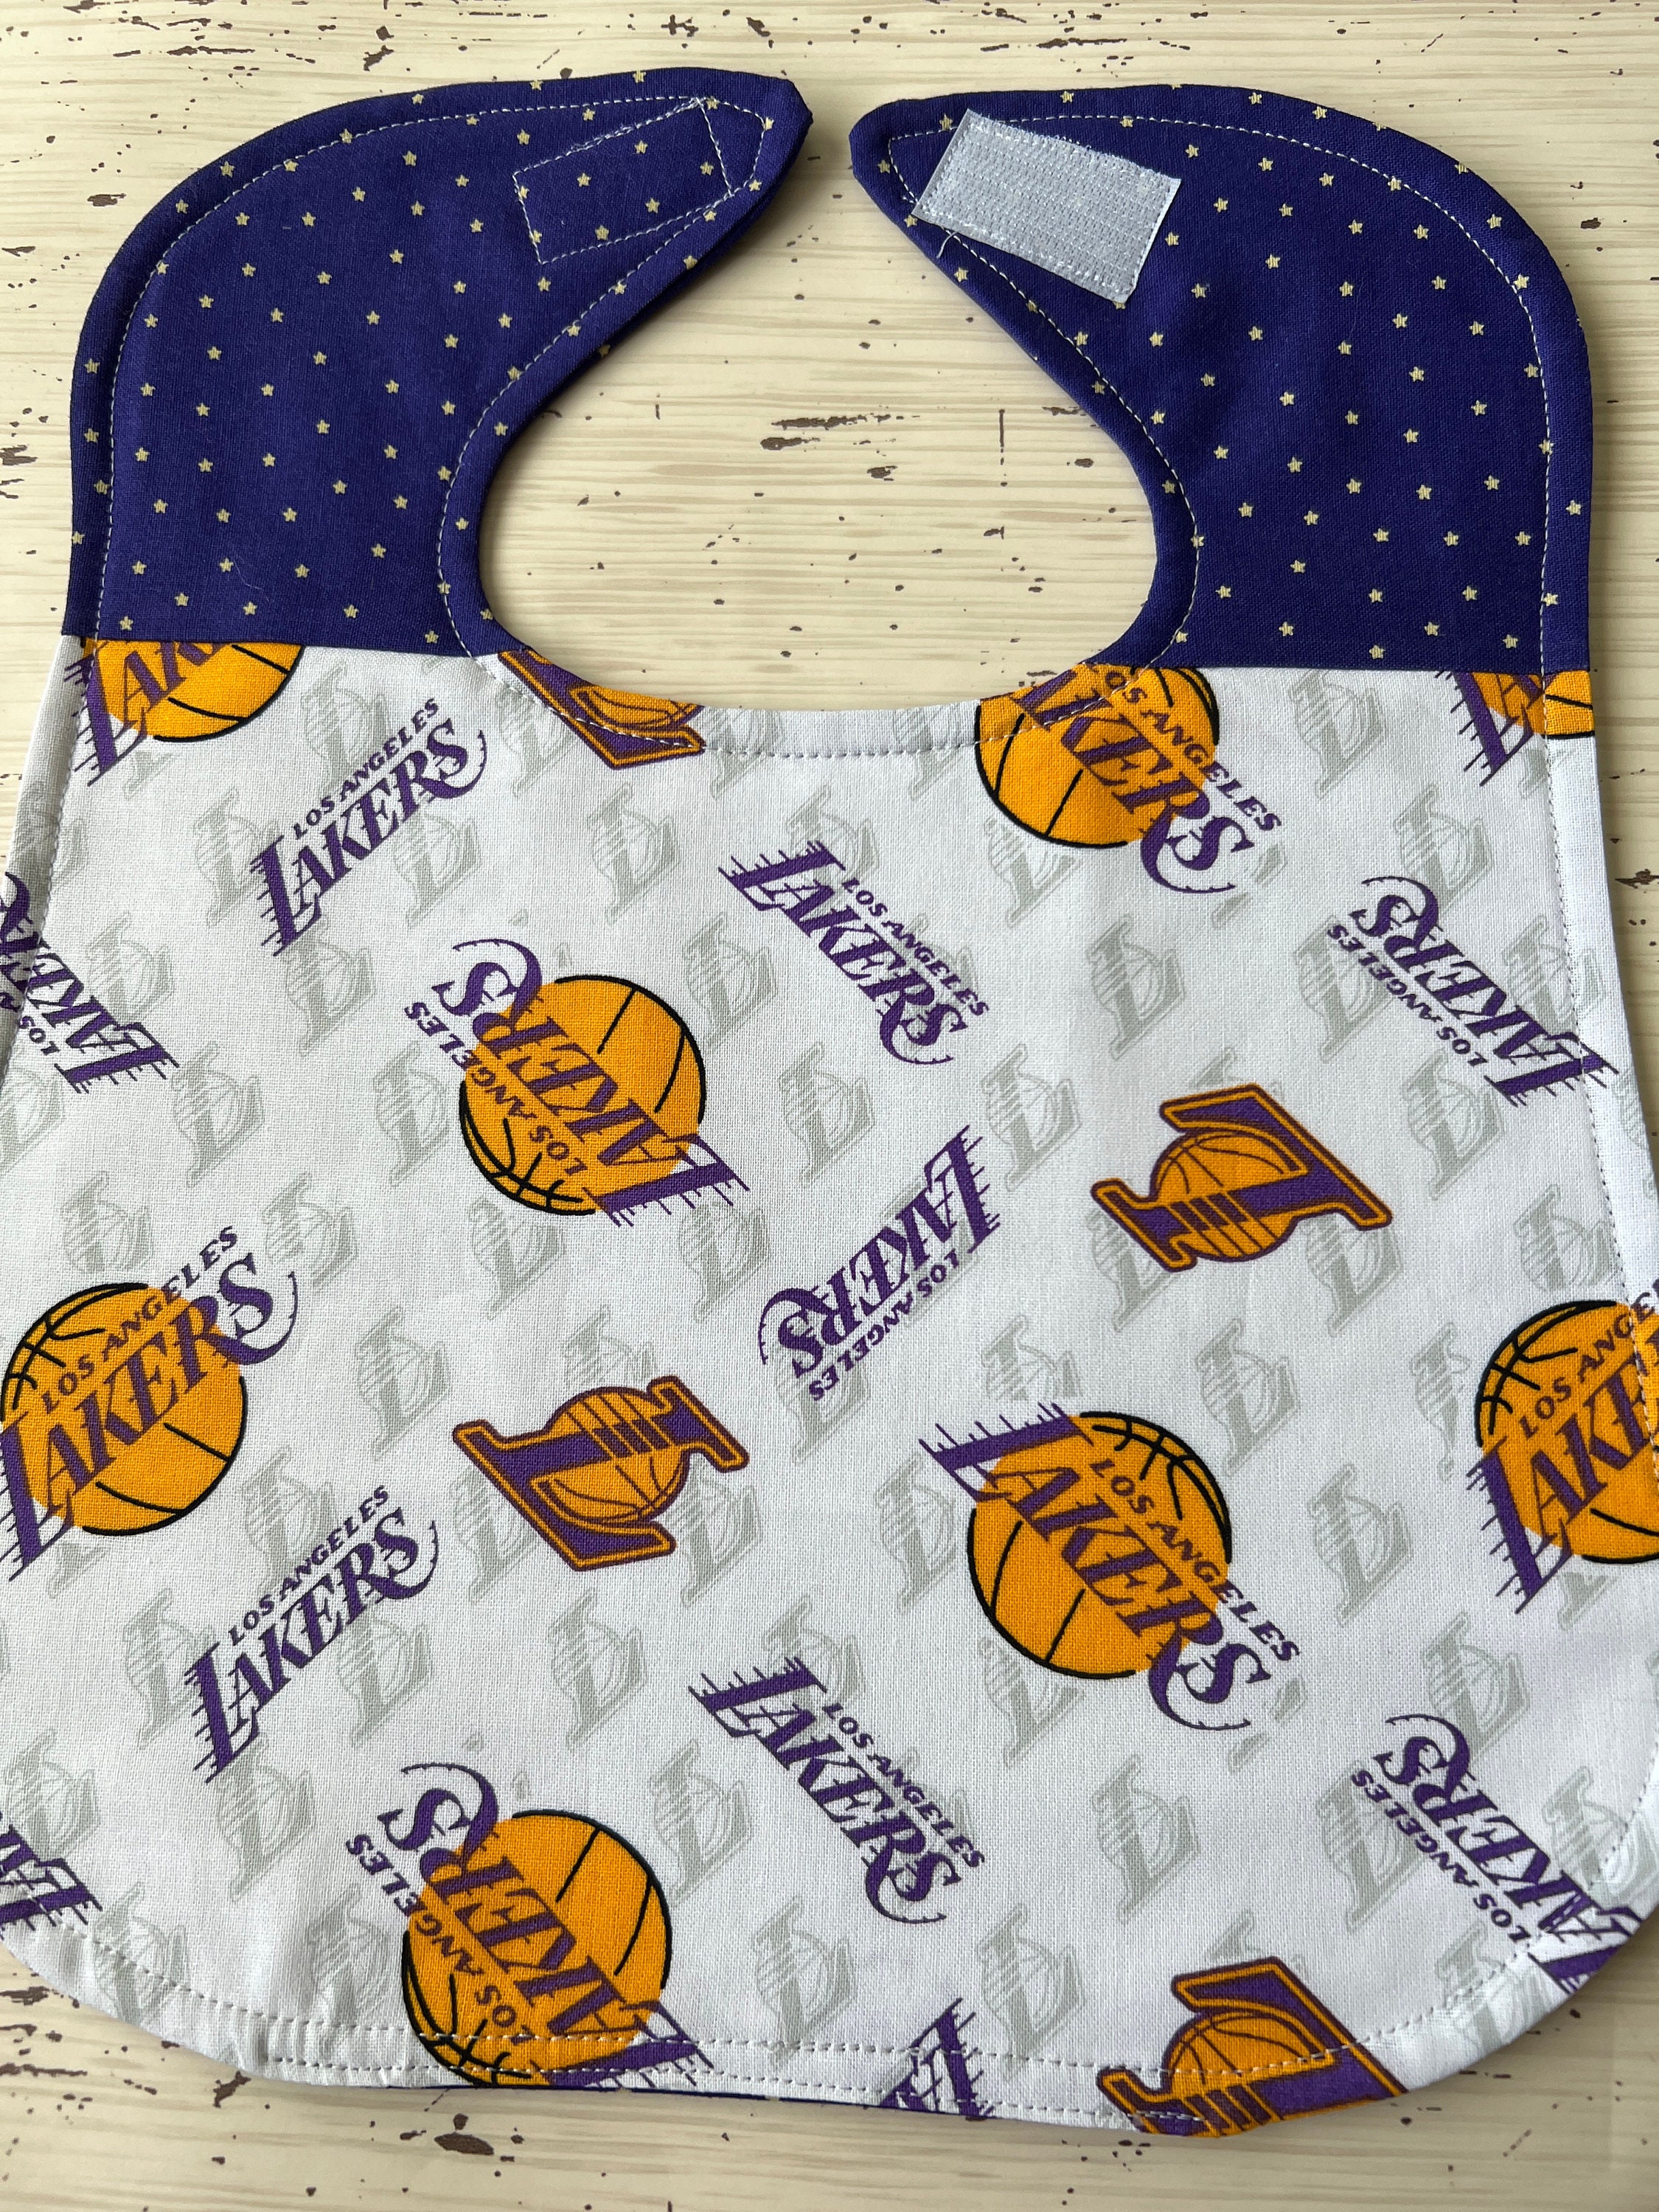 Lakers Baby In Nba Fan Apparel & Souvenirs for sale